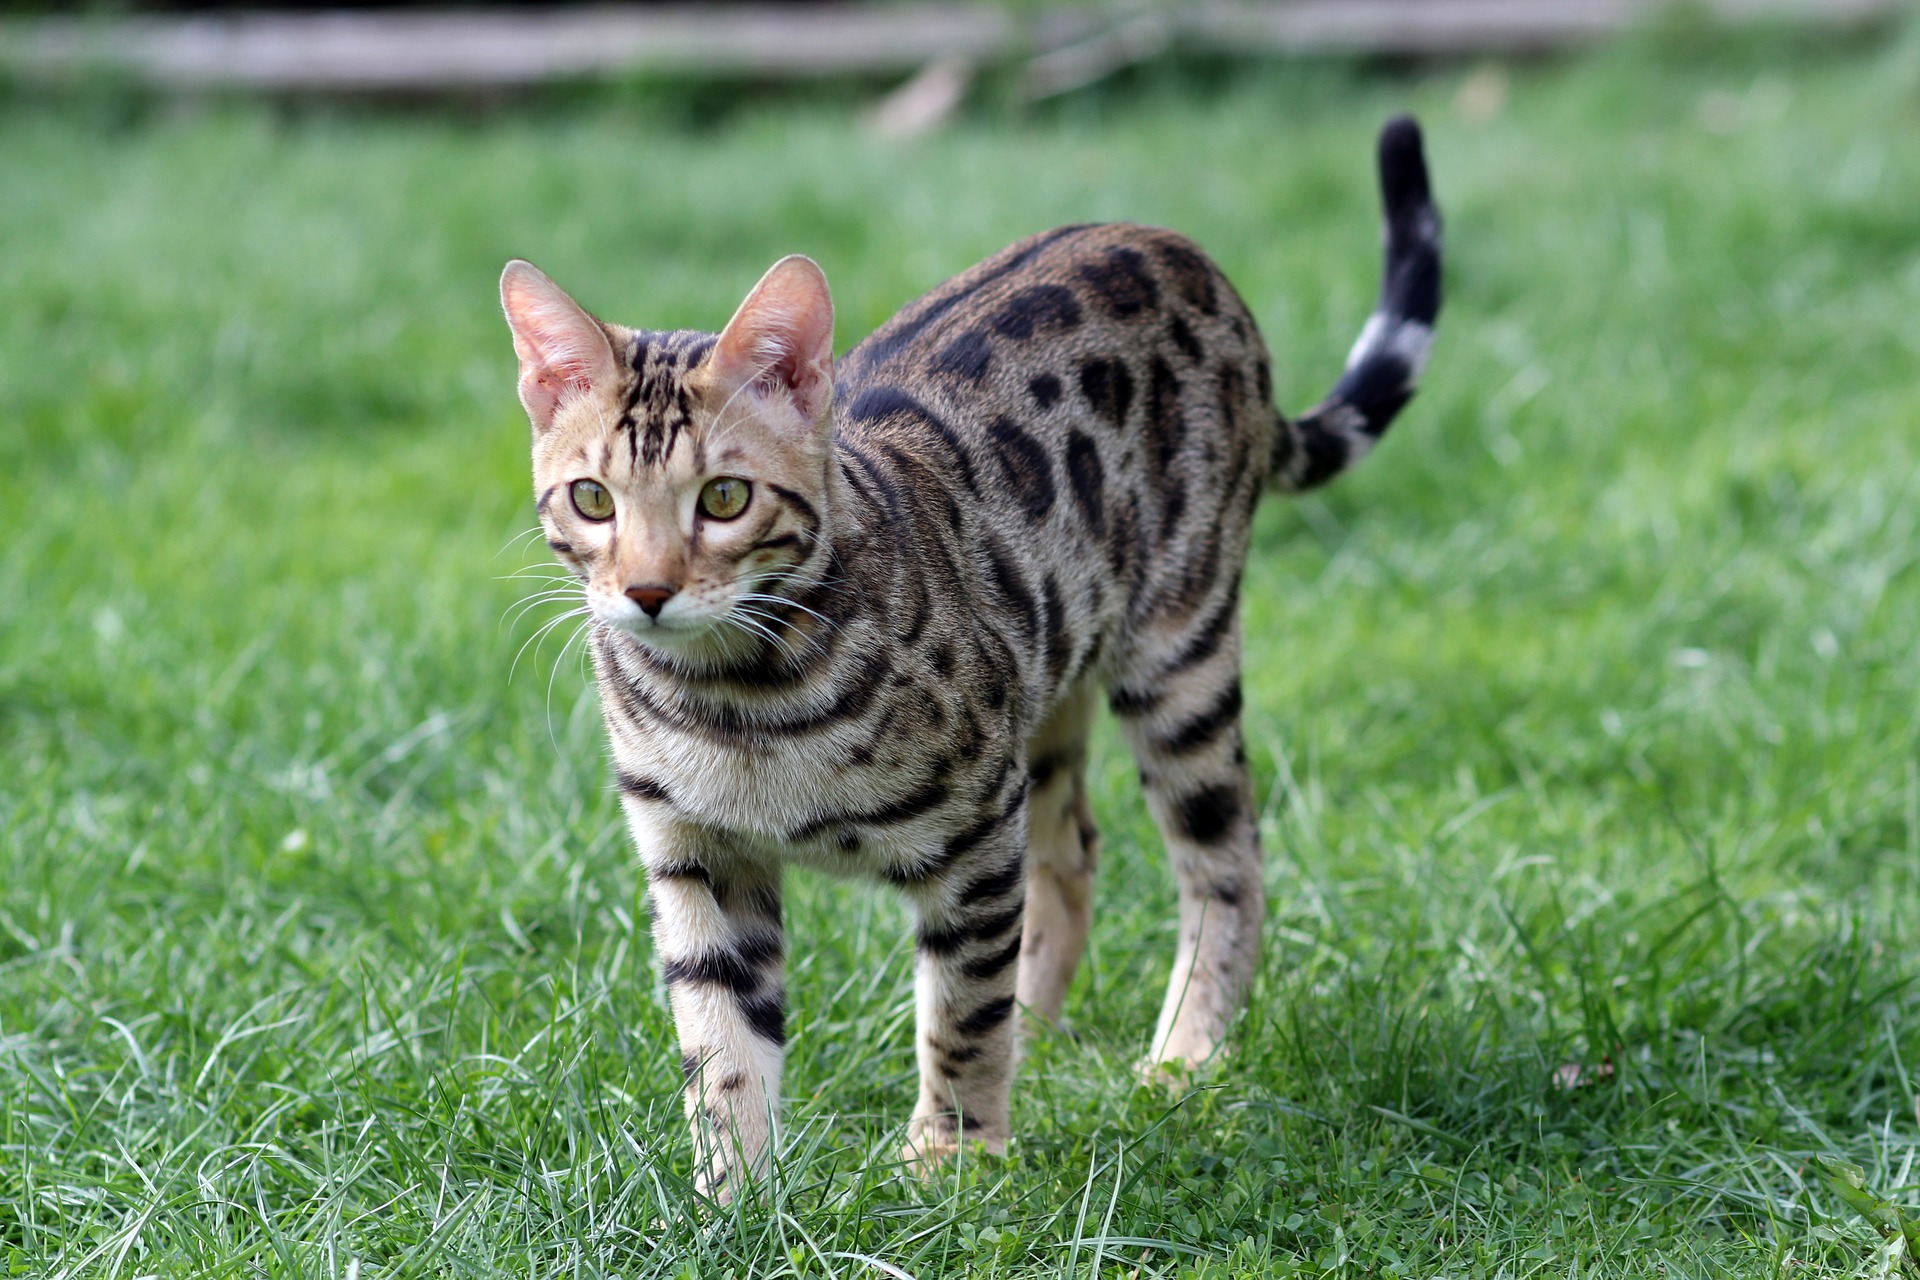 All You Need To Know About International Travel With A Bengal Cat